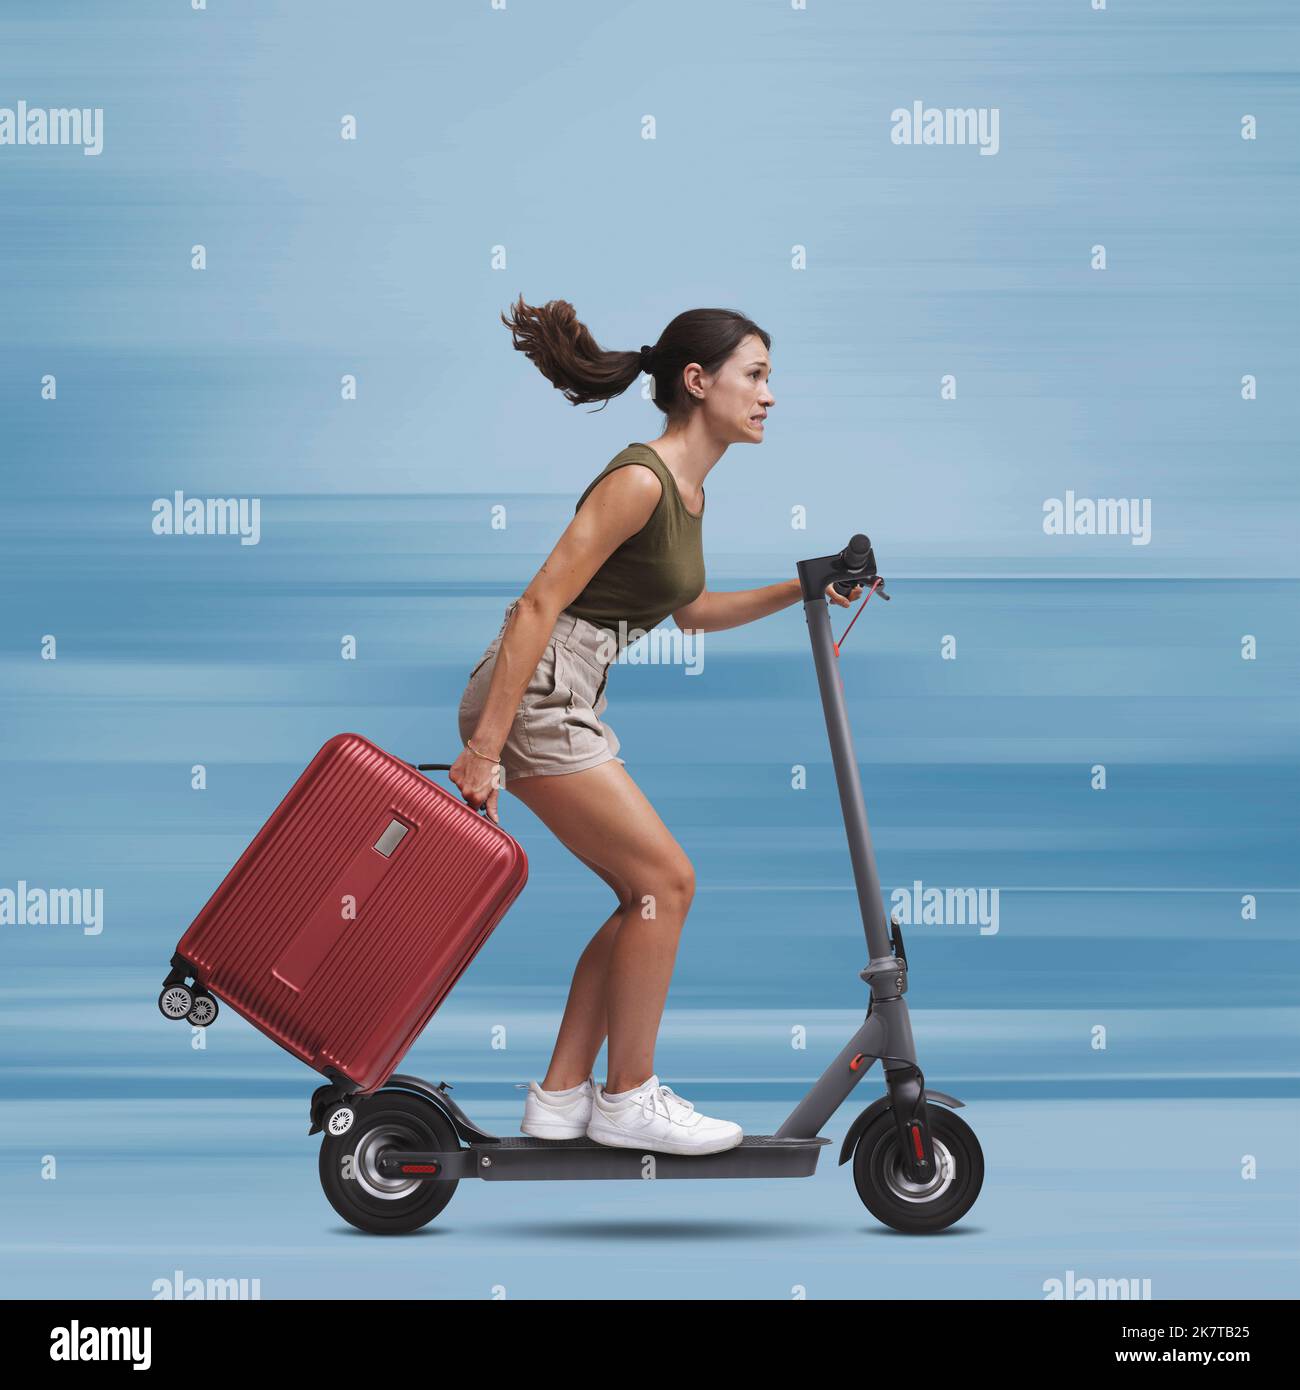 Tourist woman riding a fast electric scooter and carrying a trolley bag, she is late, sustainable mobility concept Stock Photo